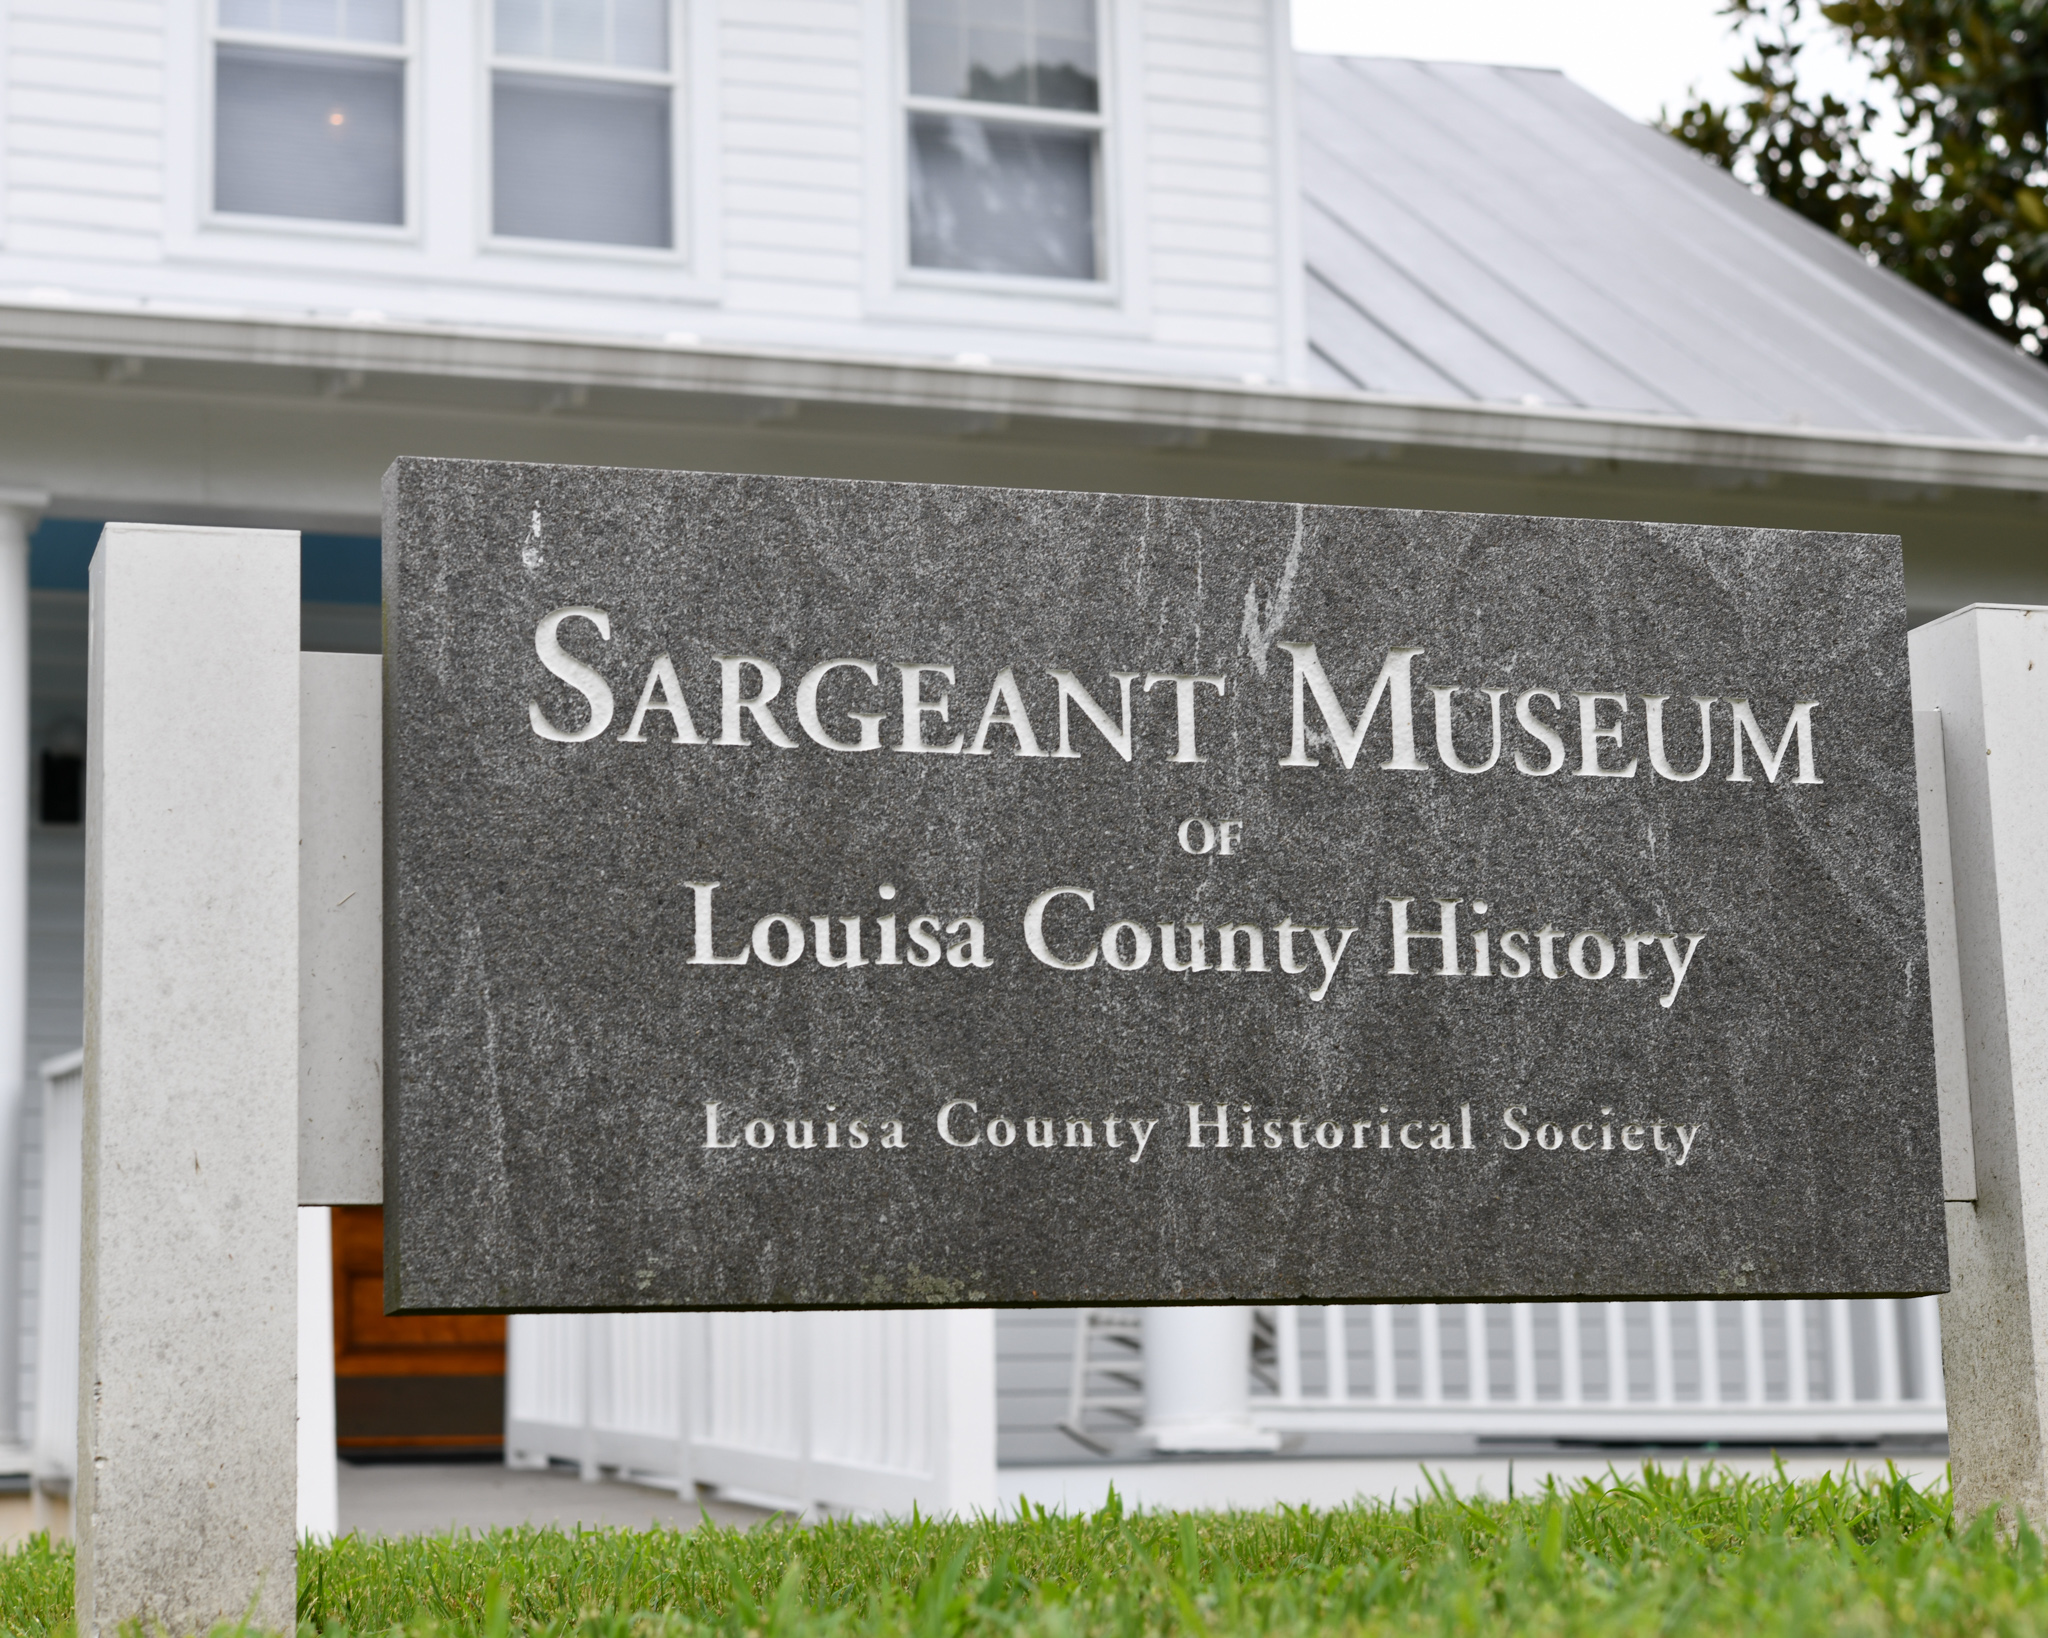 Granite sign in front of a historic building reading Seargeant Museum of Louisa County History, Louisa County Historical Society